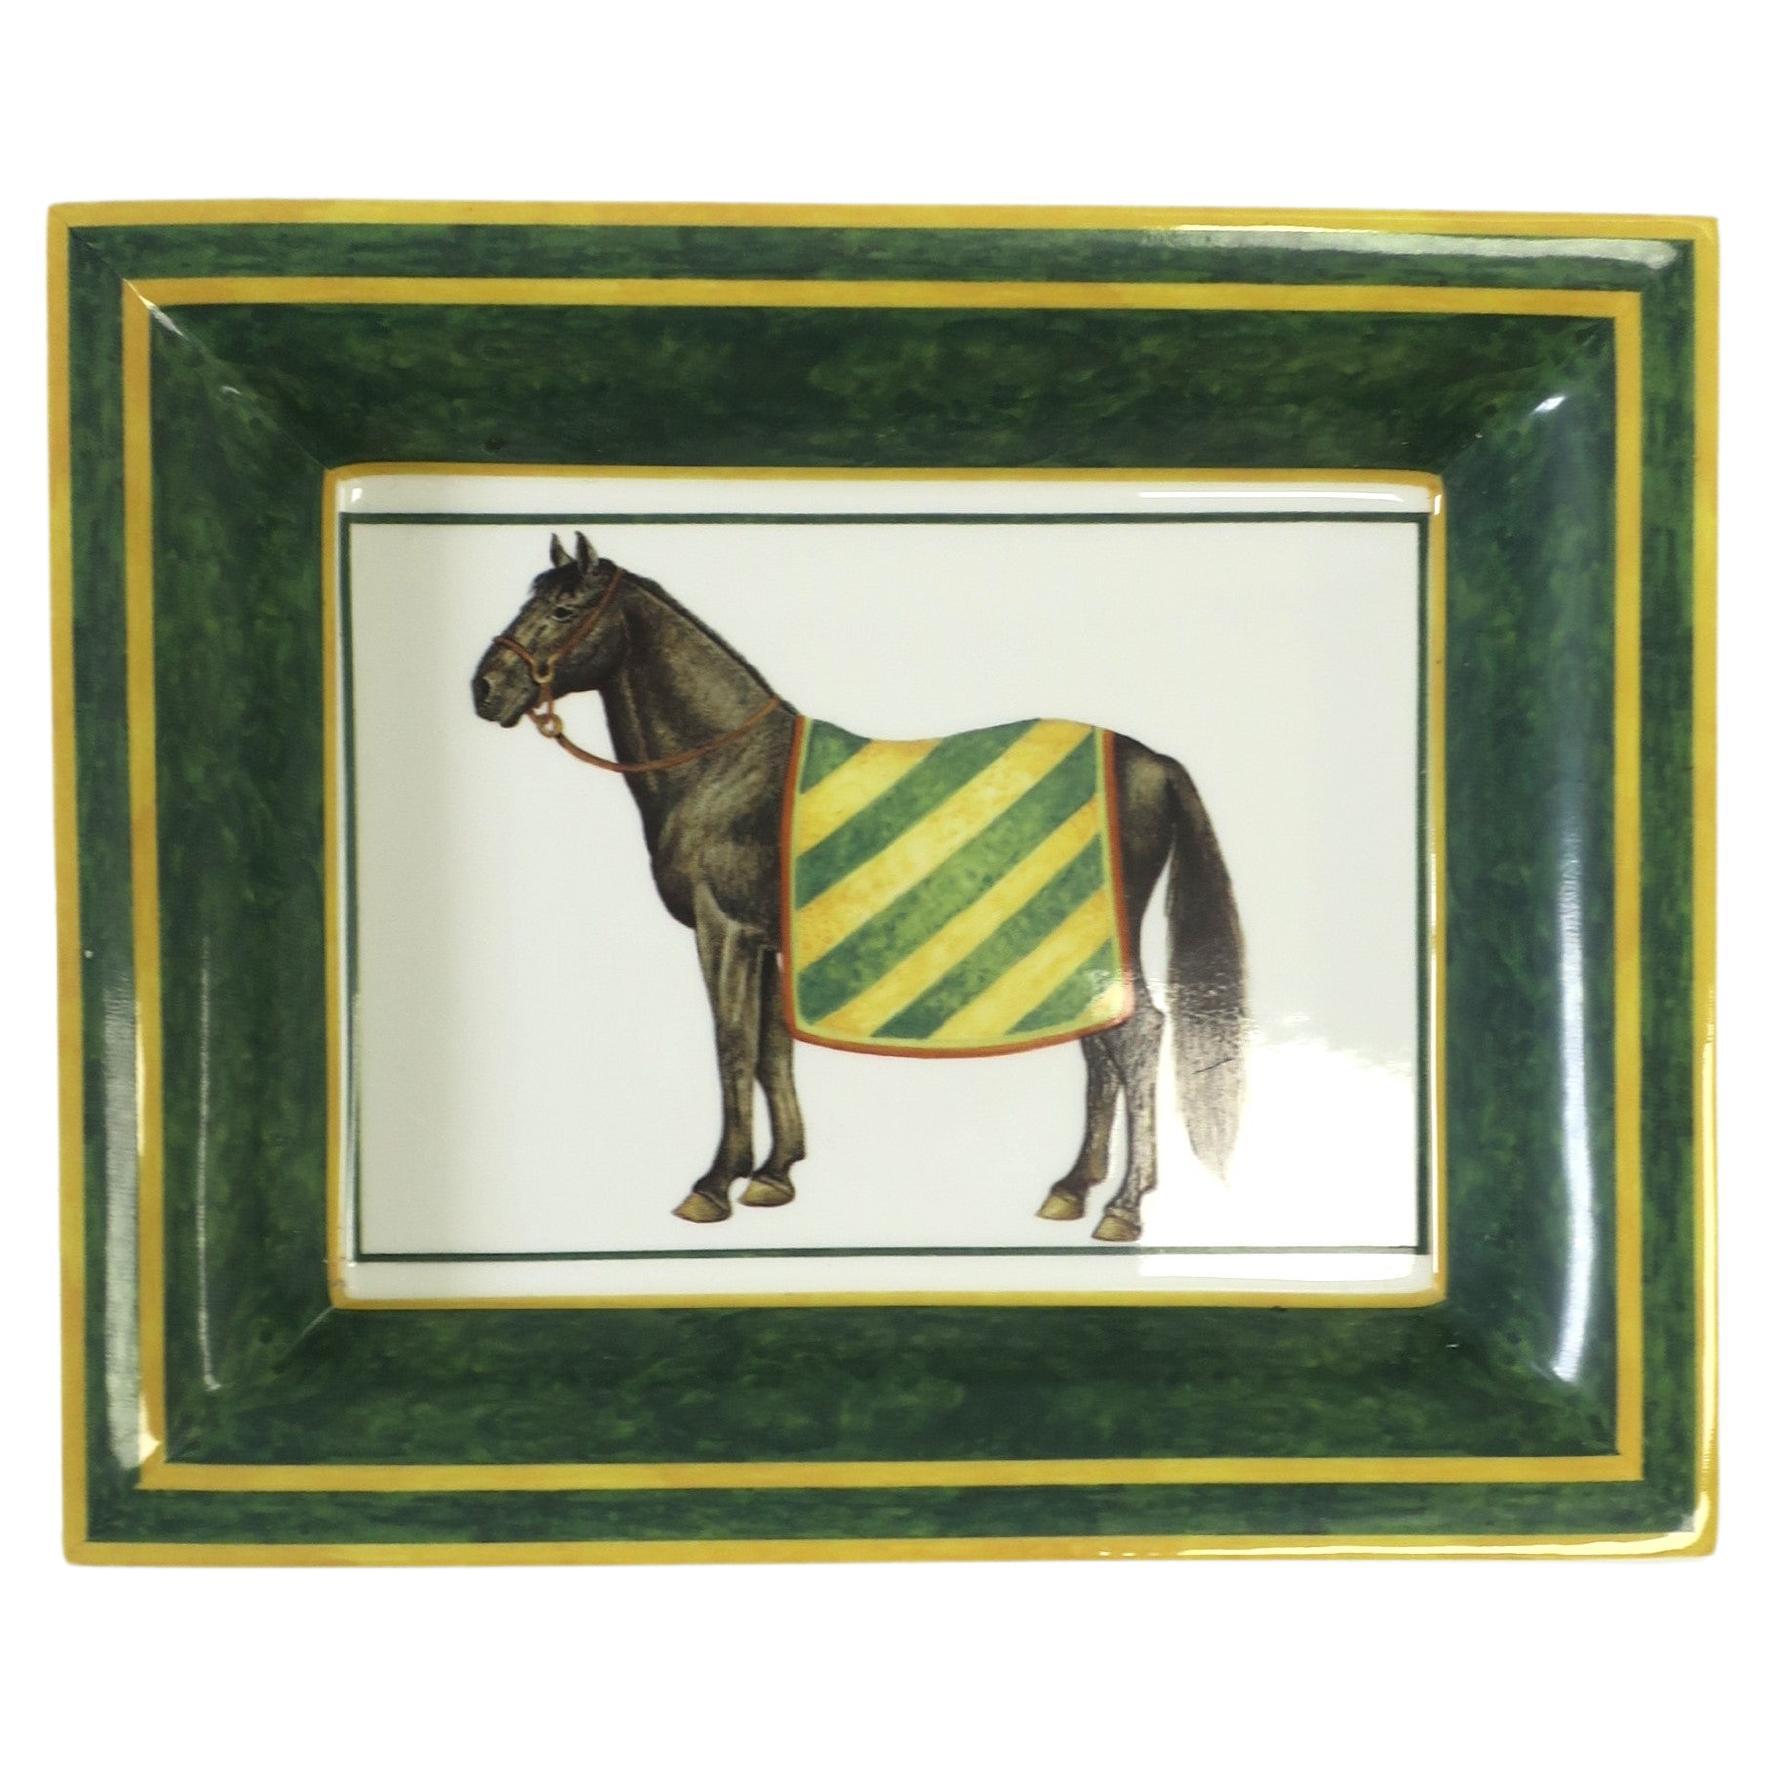 Italian Porcelain Jewelry Tray Dish Vide-Poche Catchall with Horse Design For Sale